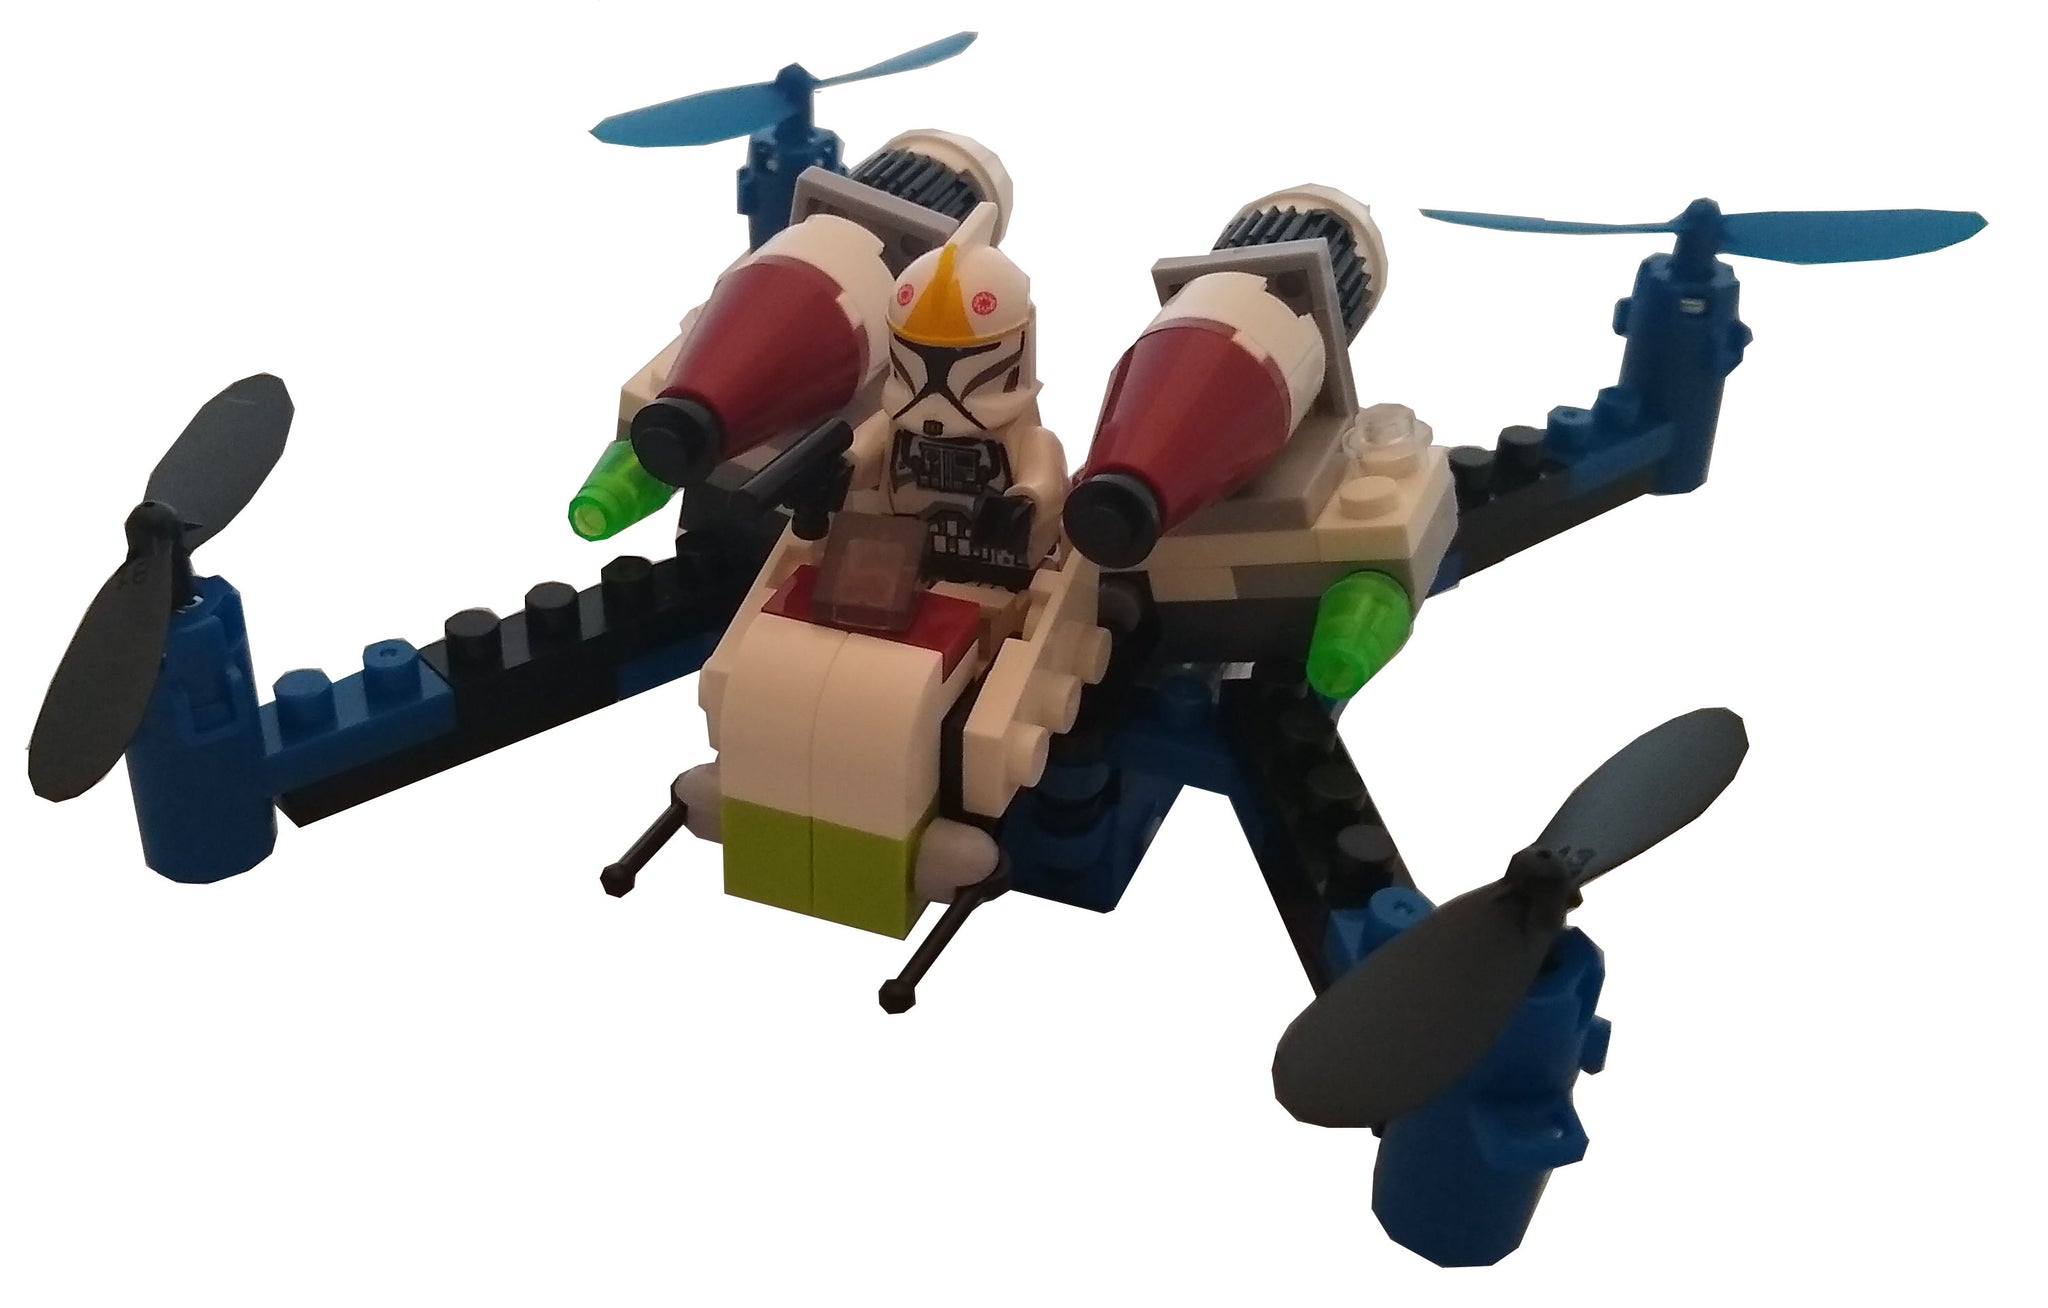 force flyers drone